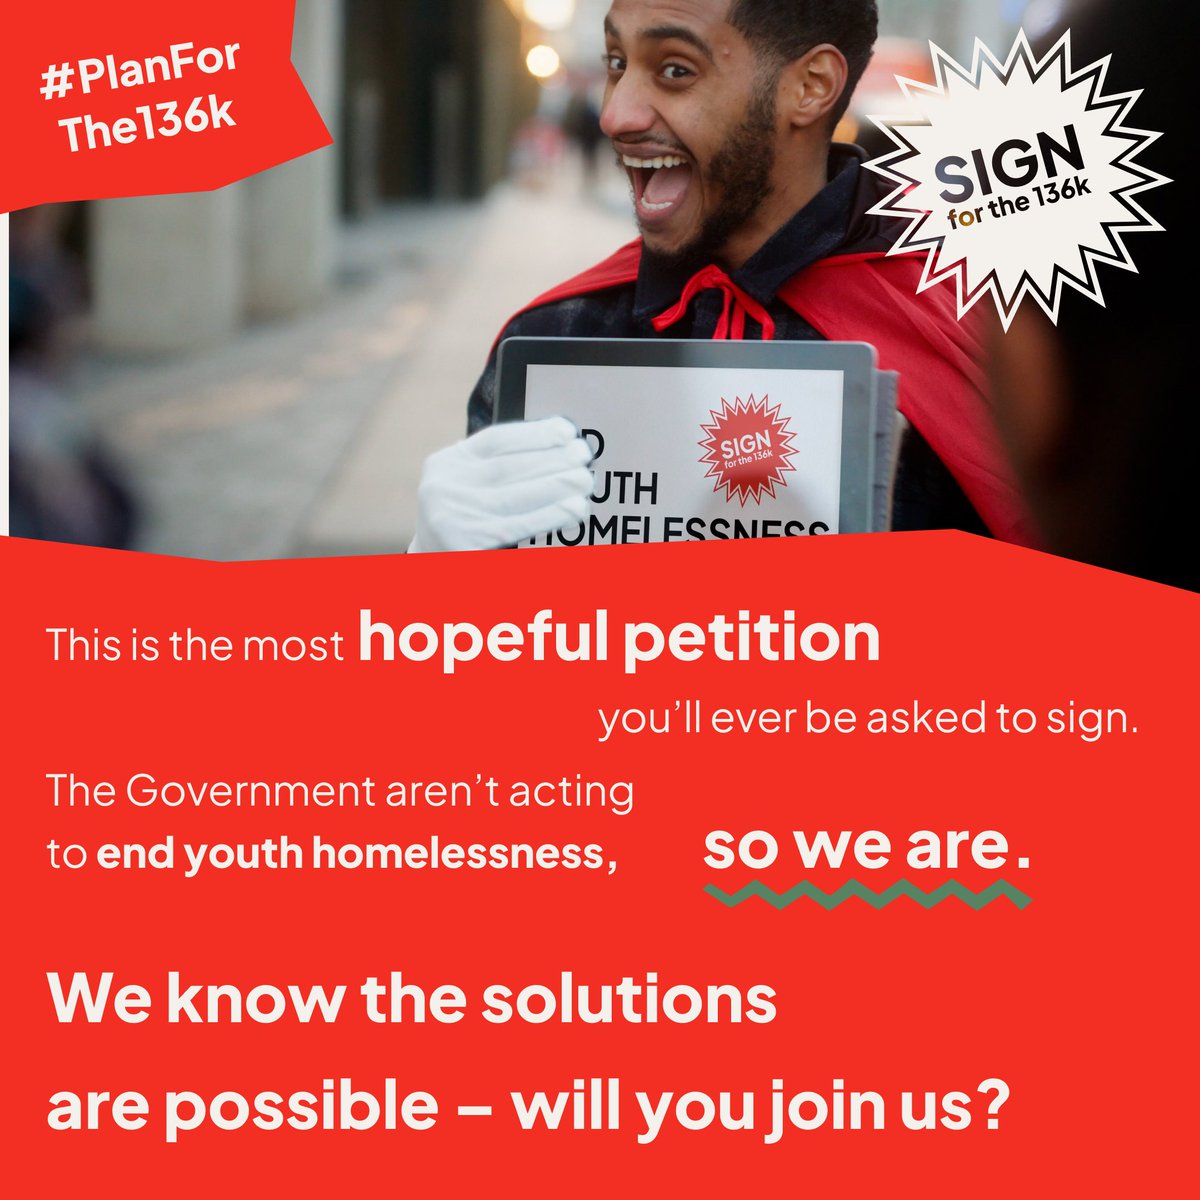 136,000 young people faced homelessness last year.

This is unacceptable.

We've teamed up with 120 organisations to call on the government to make a #PlanForThe136k and solve this crisis.

Join us & sign our petition today: bit.ly/petition136k

#SignForThe136k